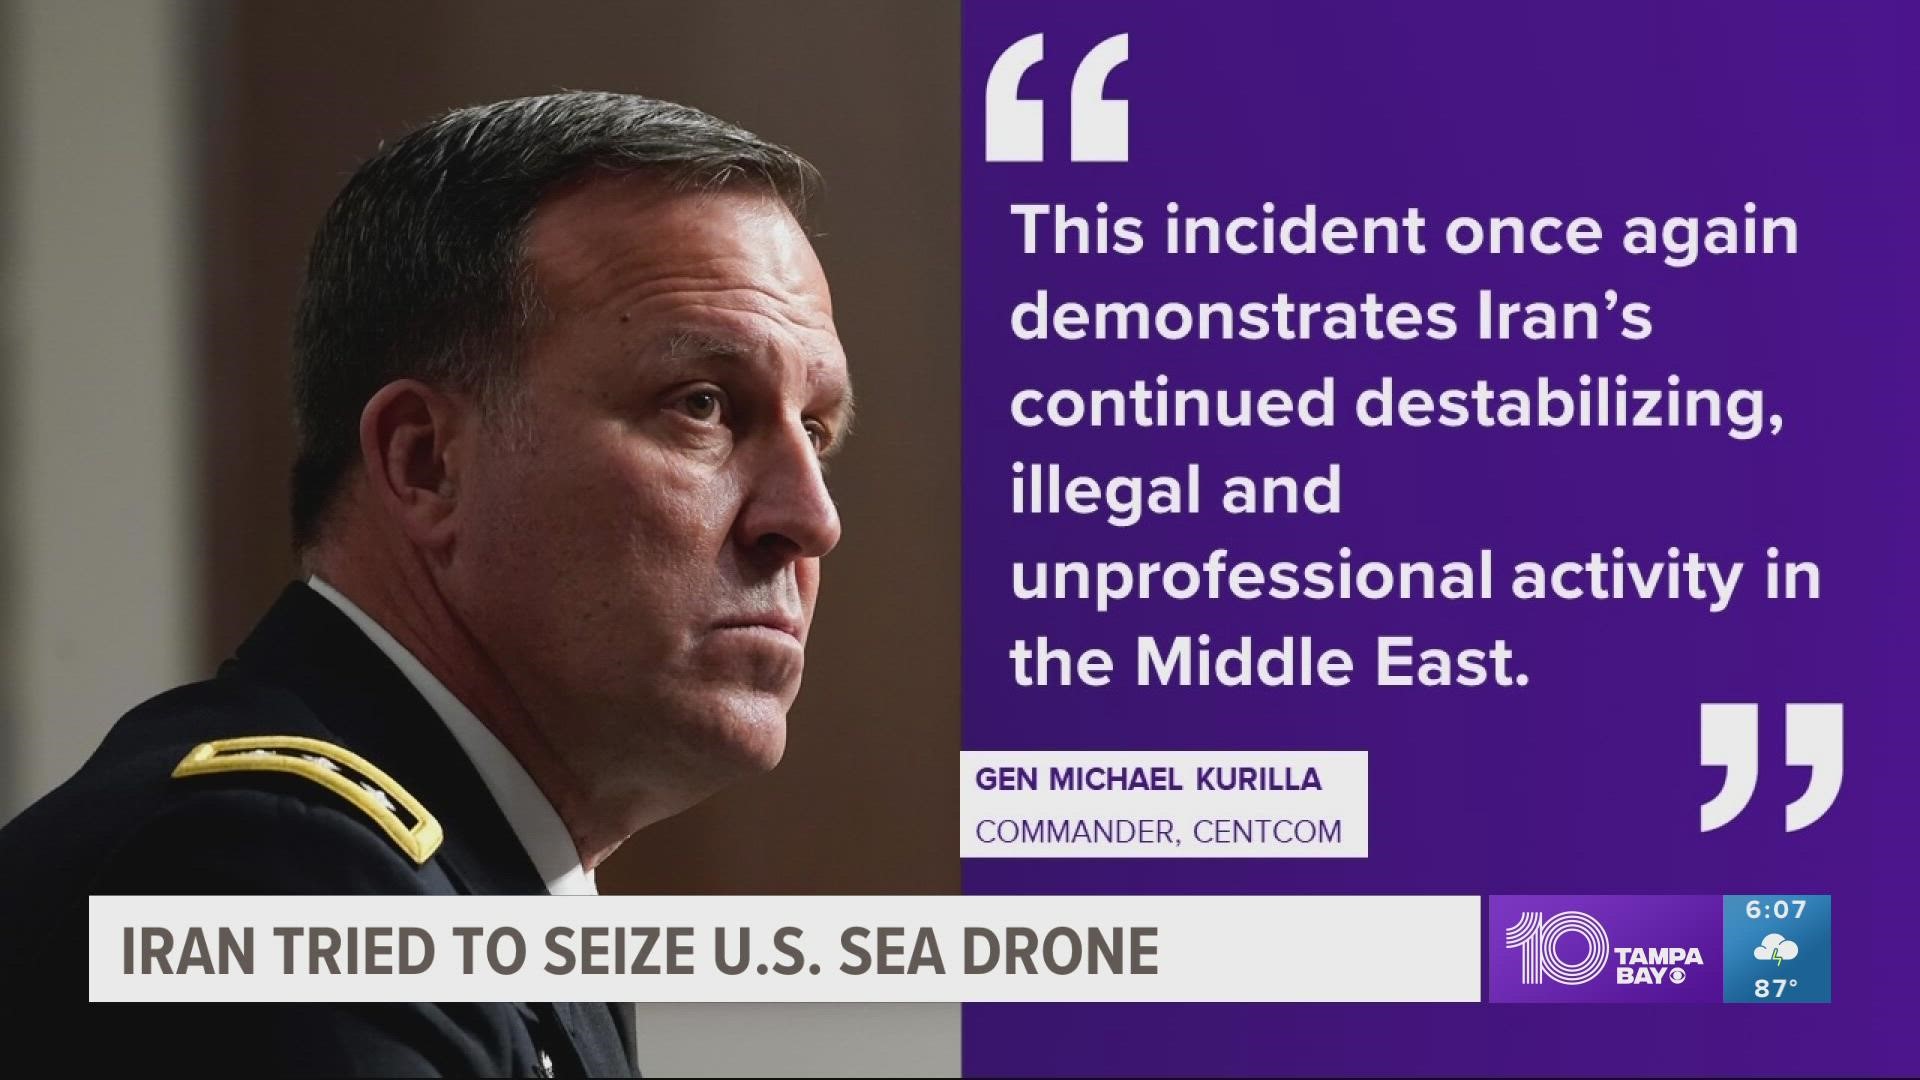 The incident marks the first time the Navy's Mideast-based 5th Fleet's new drone task force has been targeted by Iran.